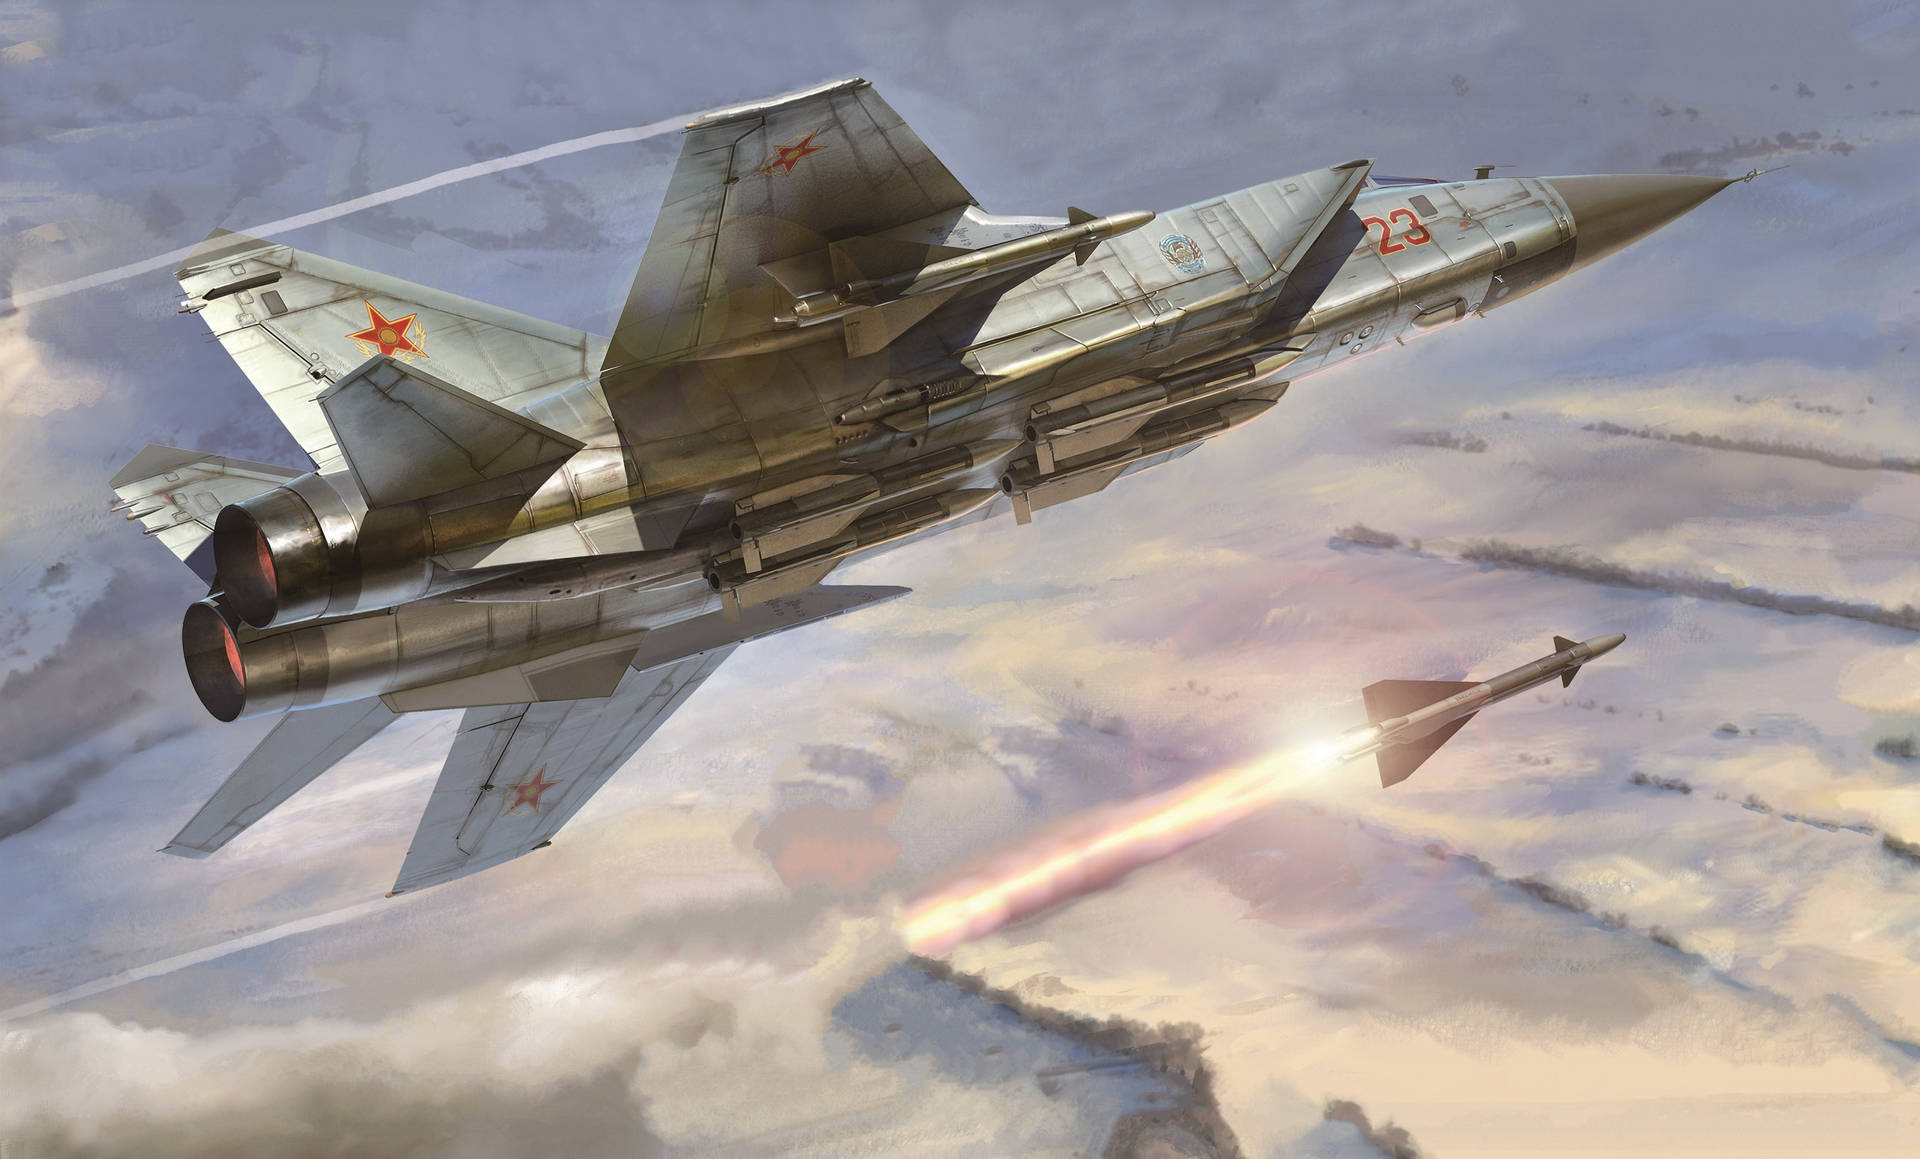 Avatar Airplanes Weapon wallpaper  Download Best Free wallpapers